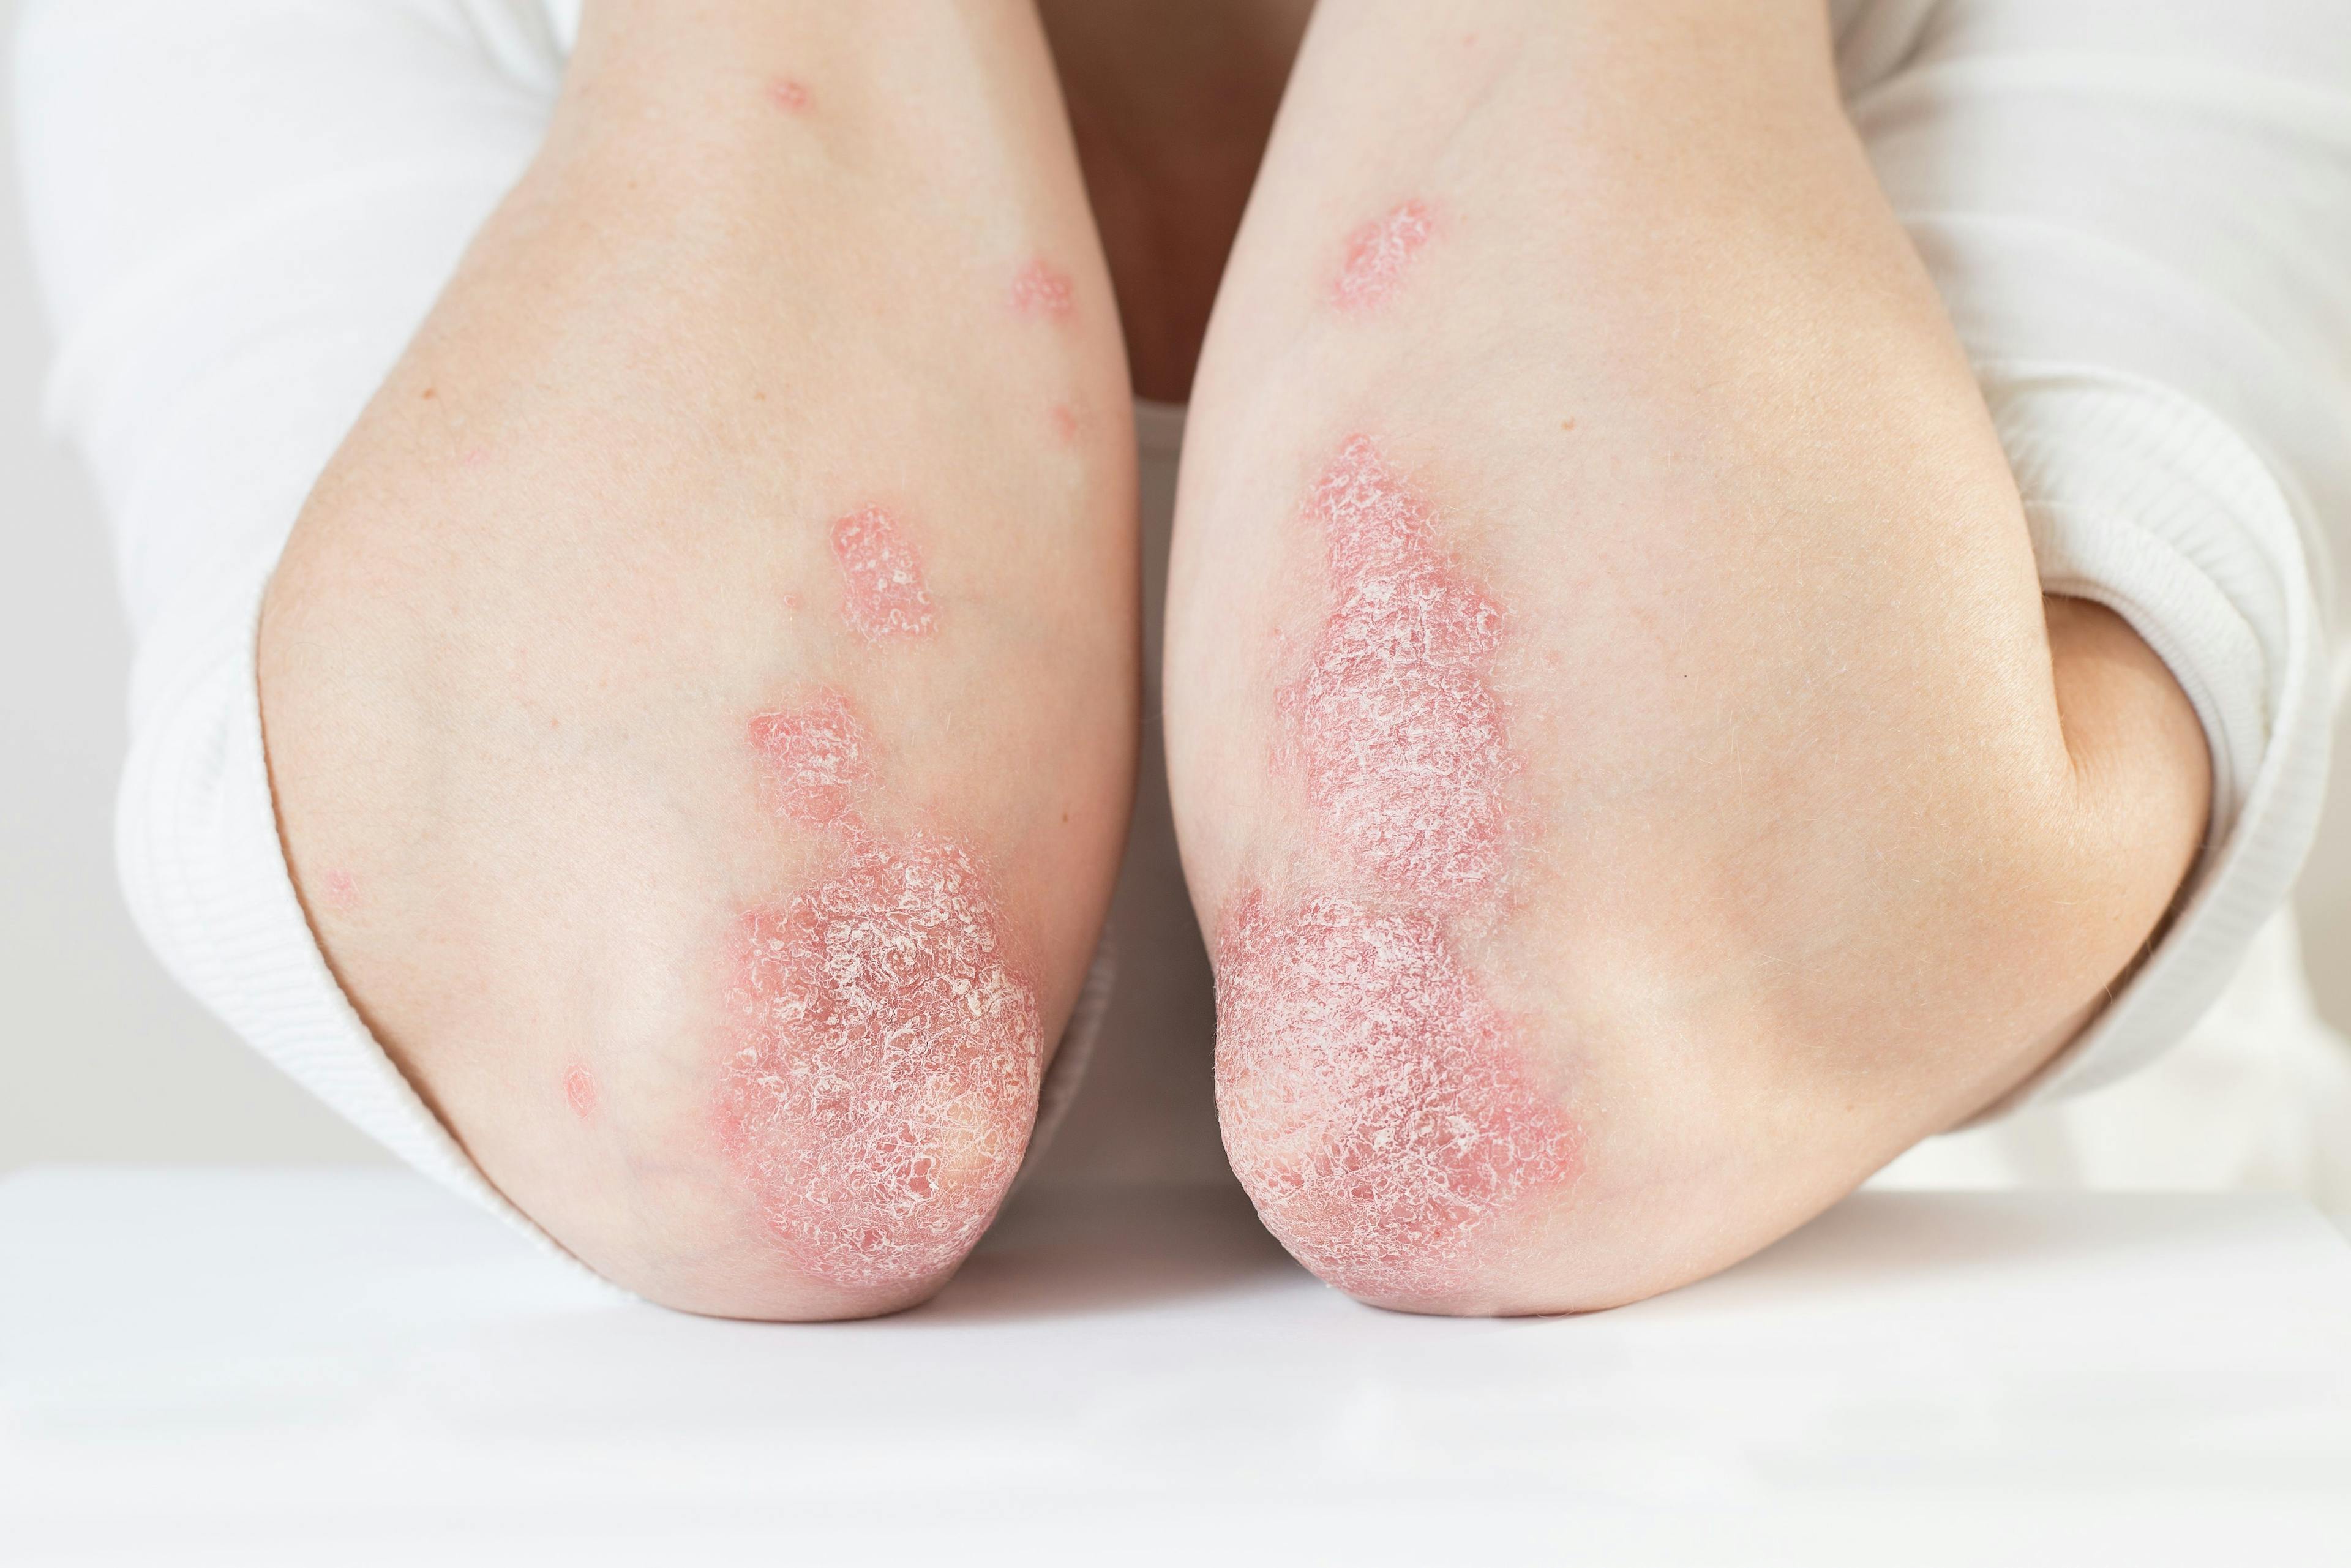 Infection Risk Lower With IL-23i and IL-17i Than With TNFi in Psoriasis